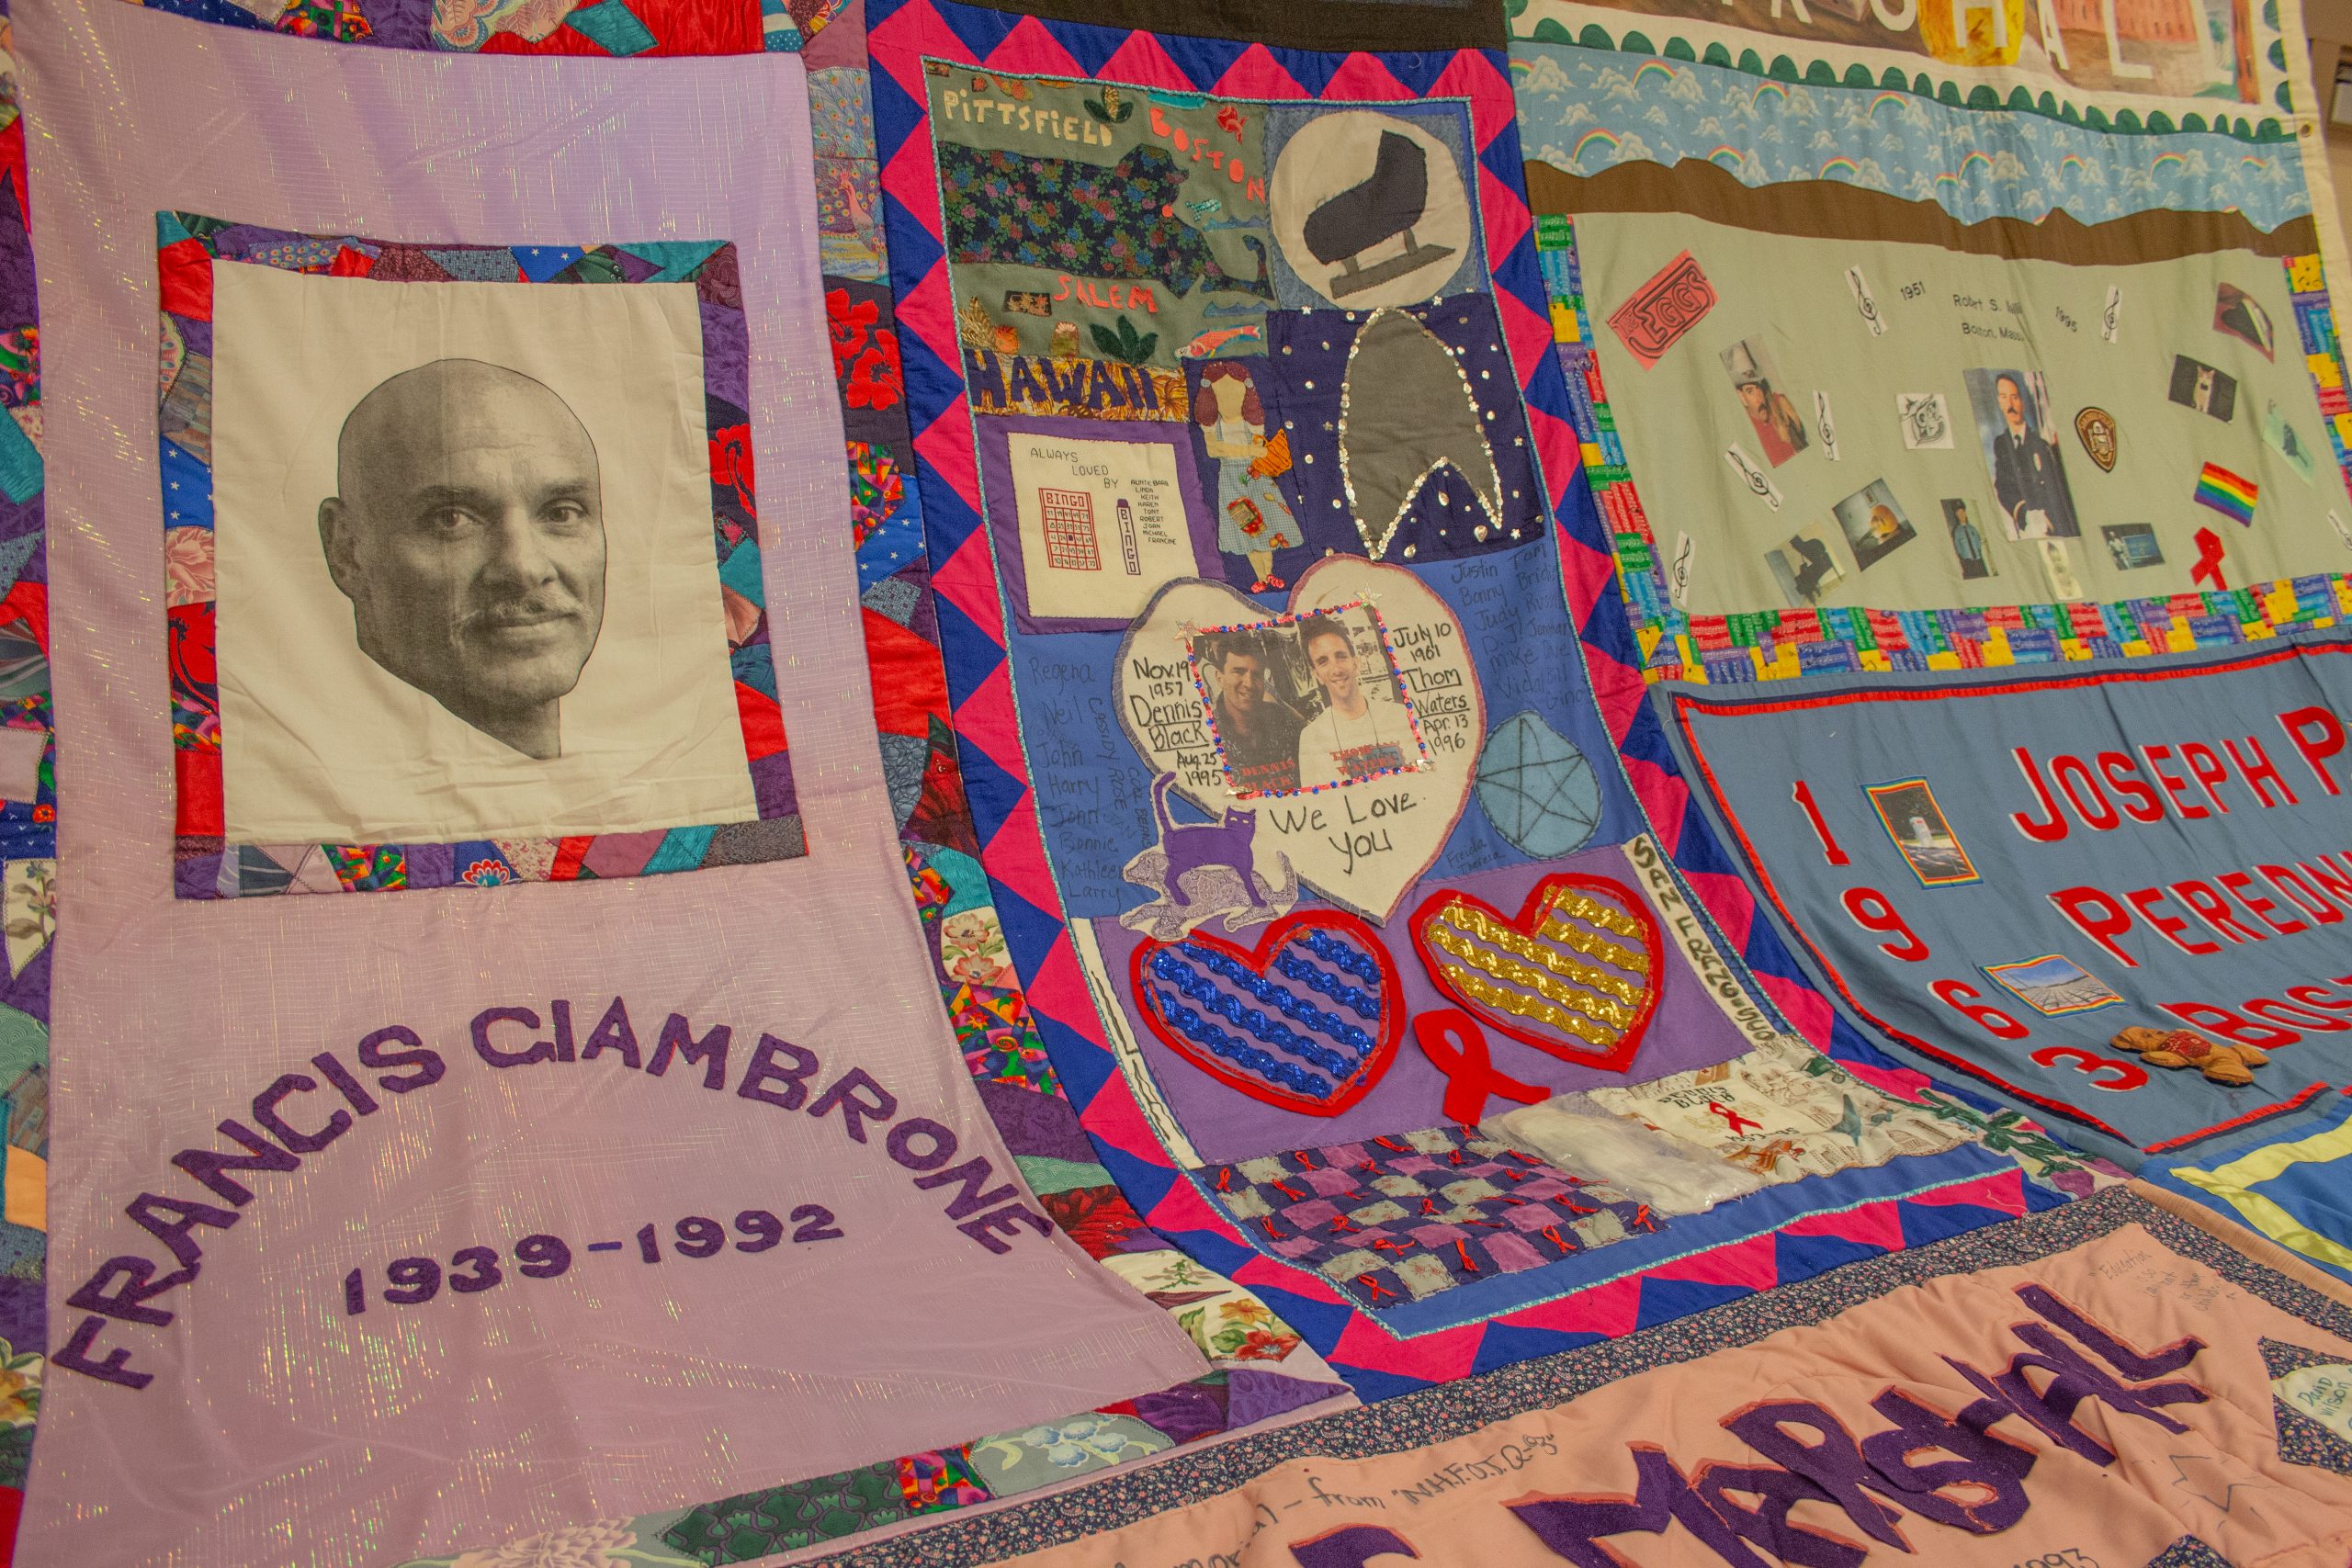 AIDS memorial quilt stitches Keene community together – The Equinox